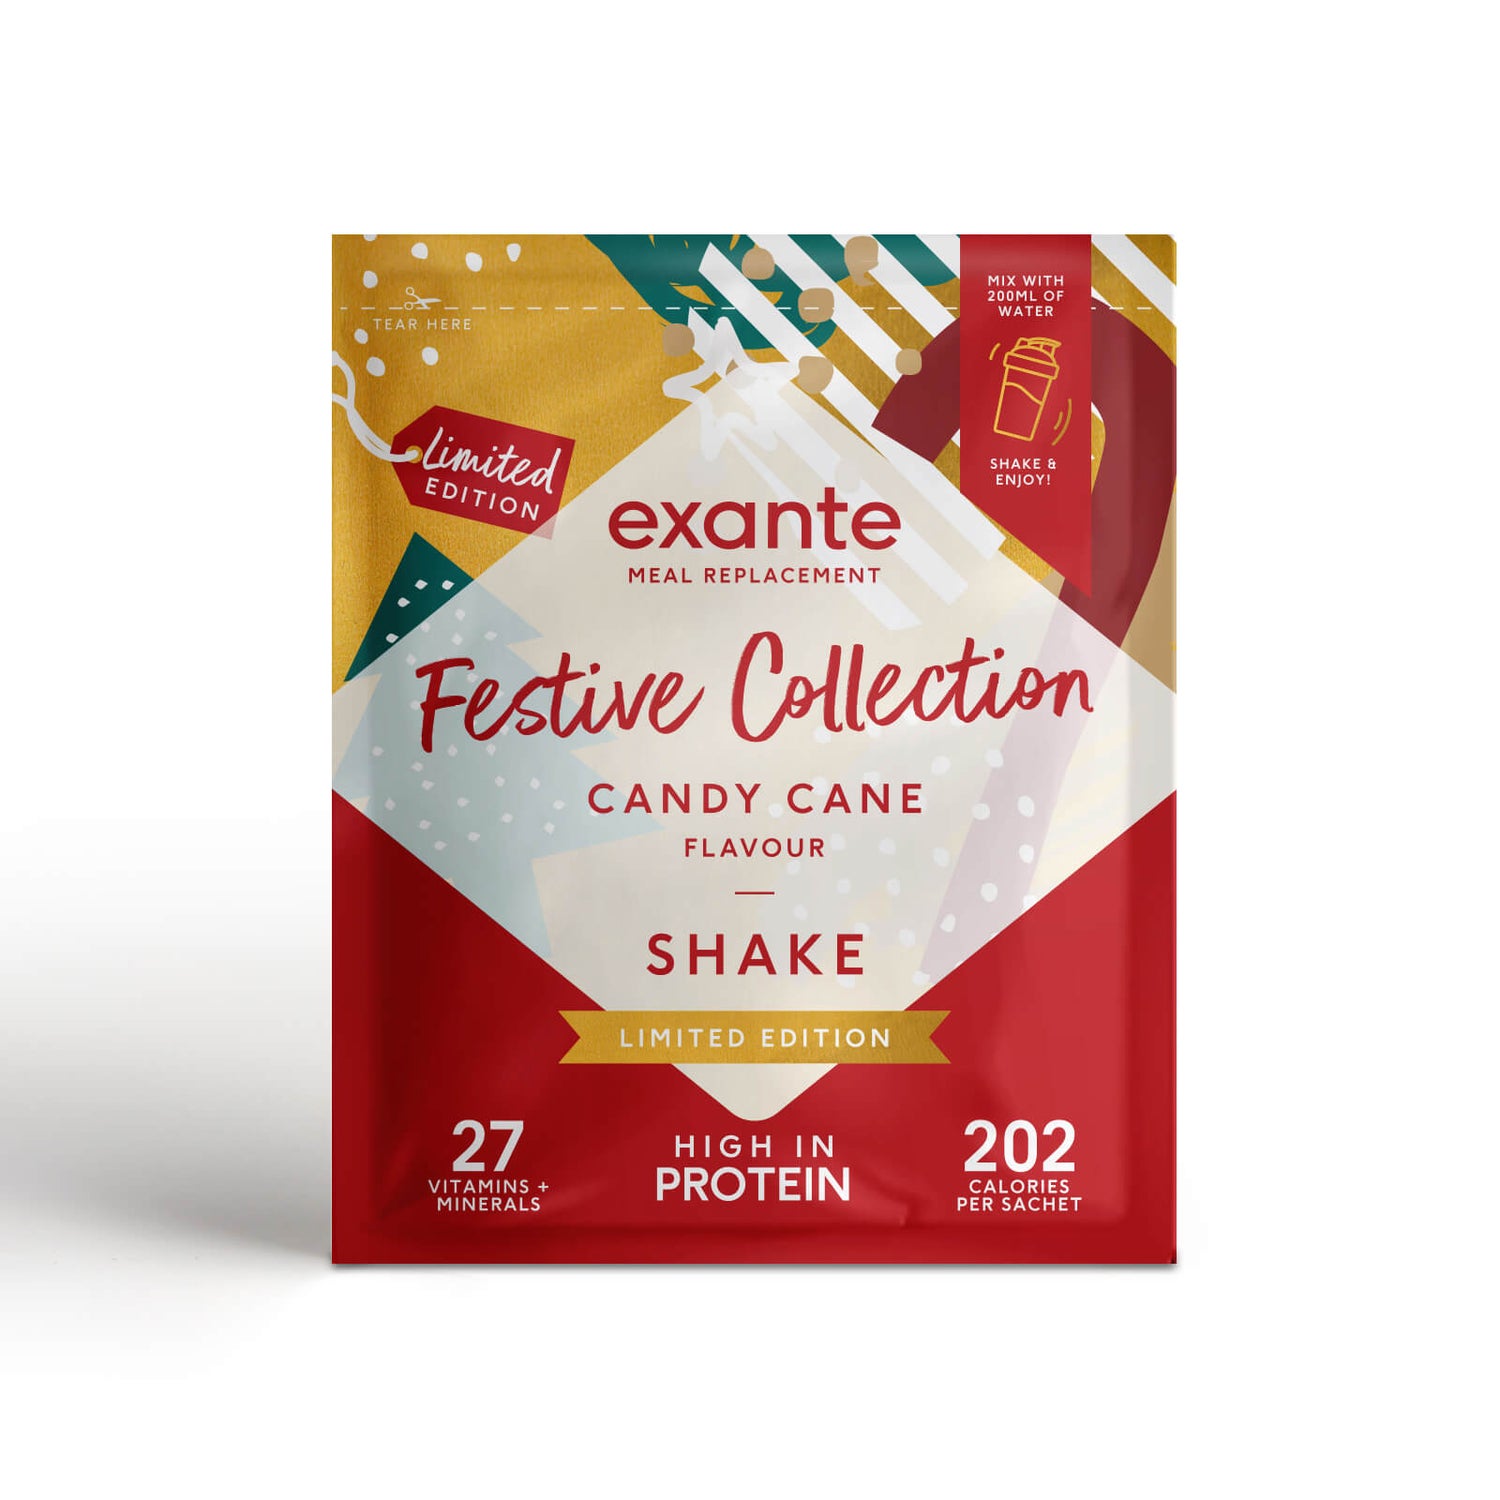 Meal Replacement Box of 7 Candy Cane Shakes